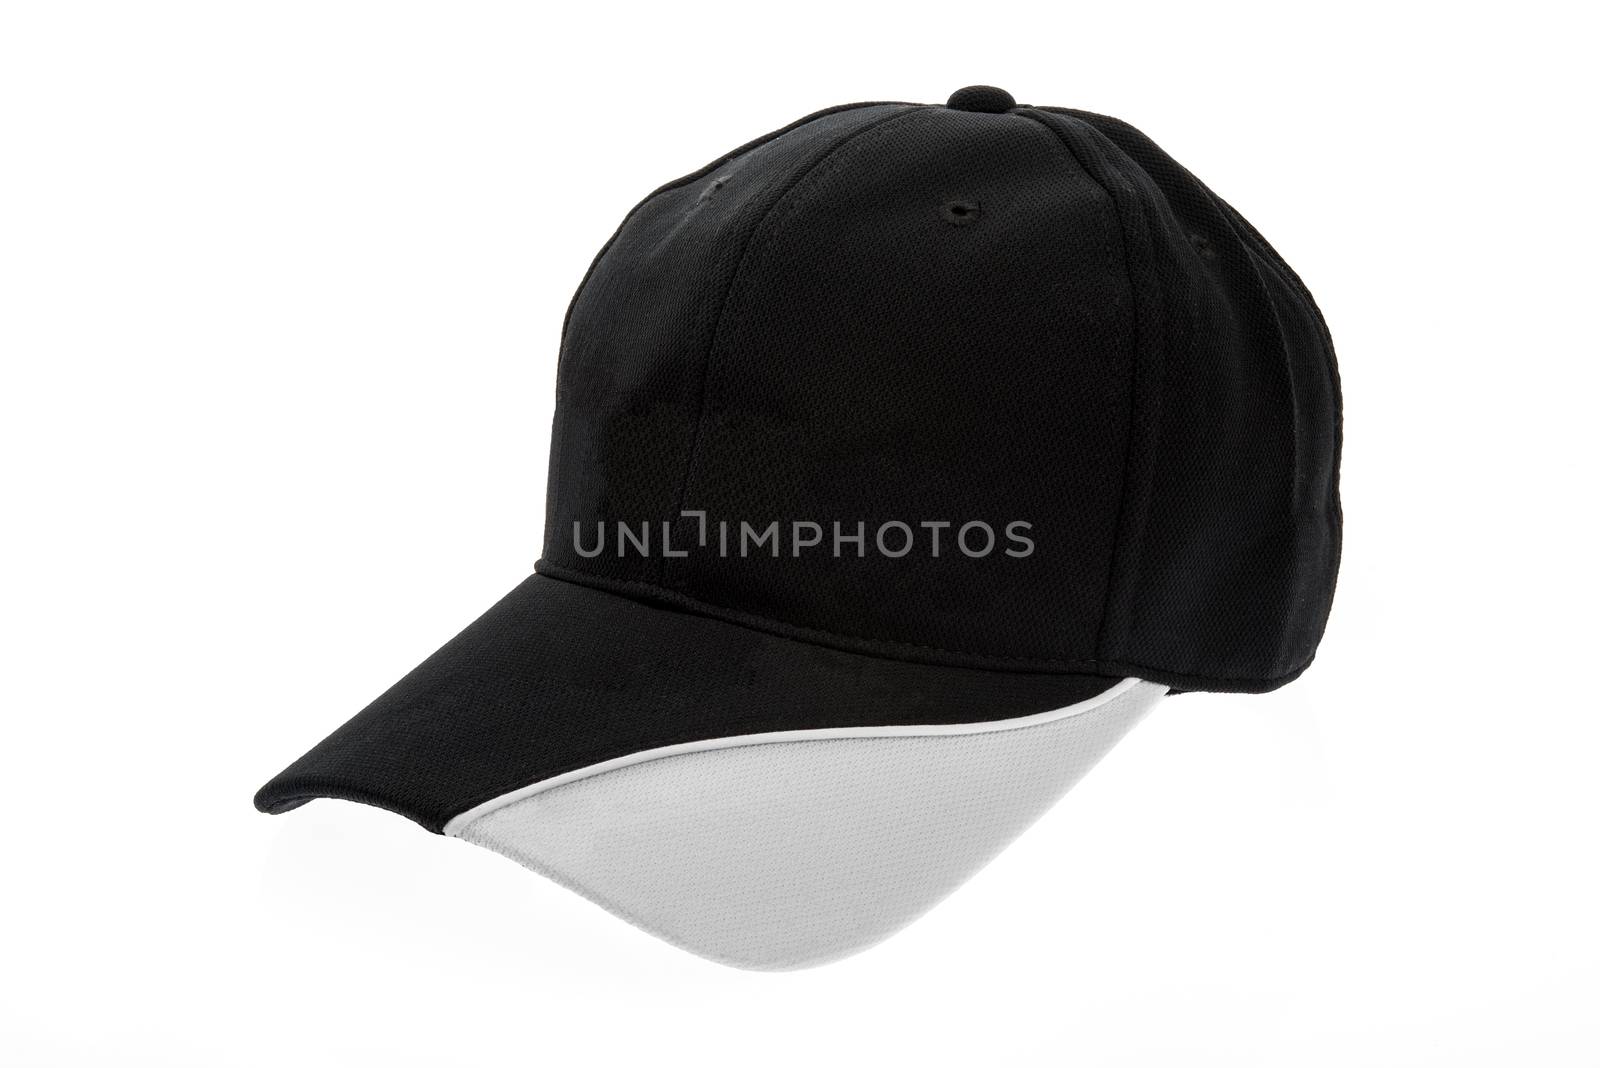 Golf cap black and white for man on white background